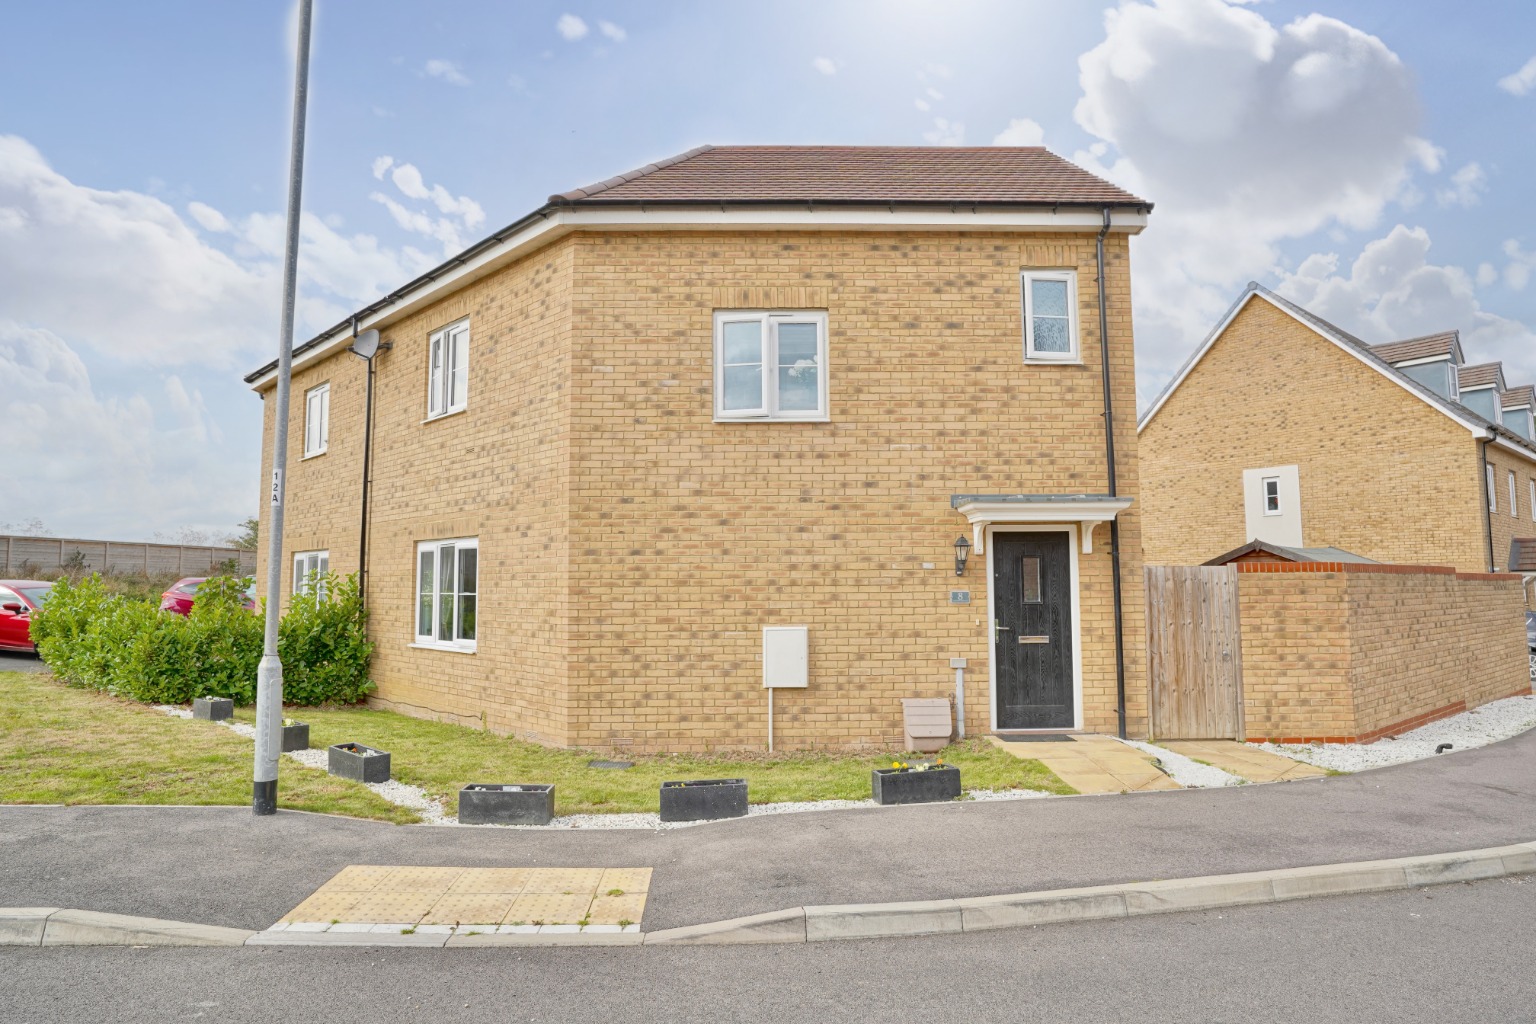 3 bed end of terrace house for sale in Gardener Crescent, Huntingdon - Property Image 1